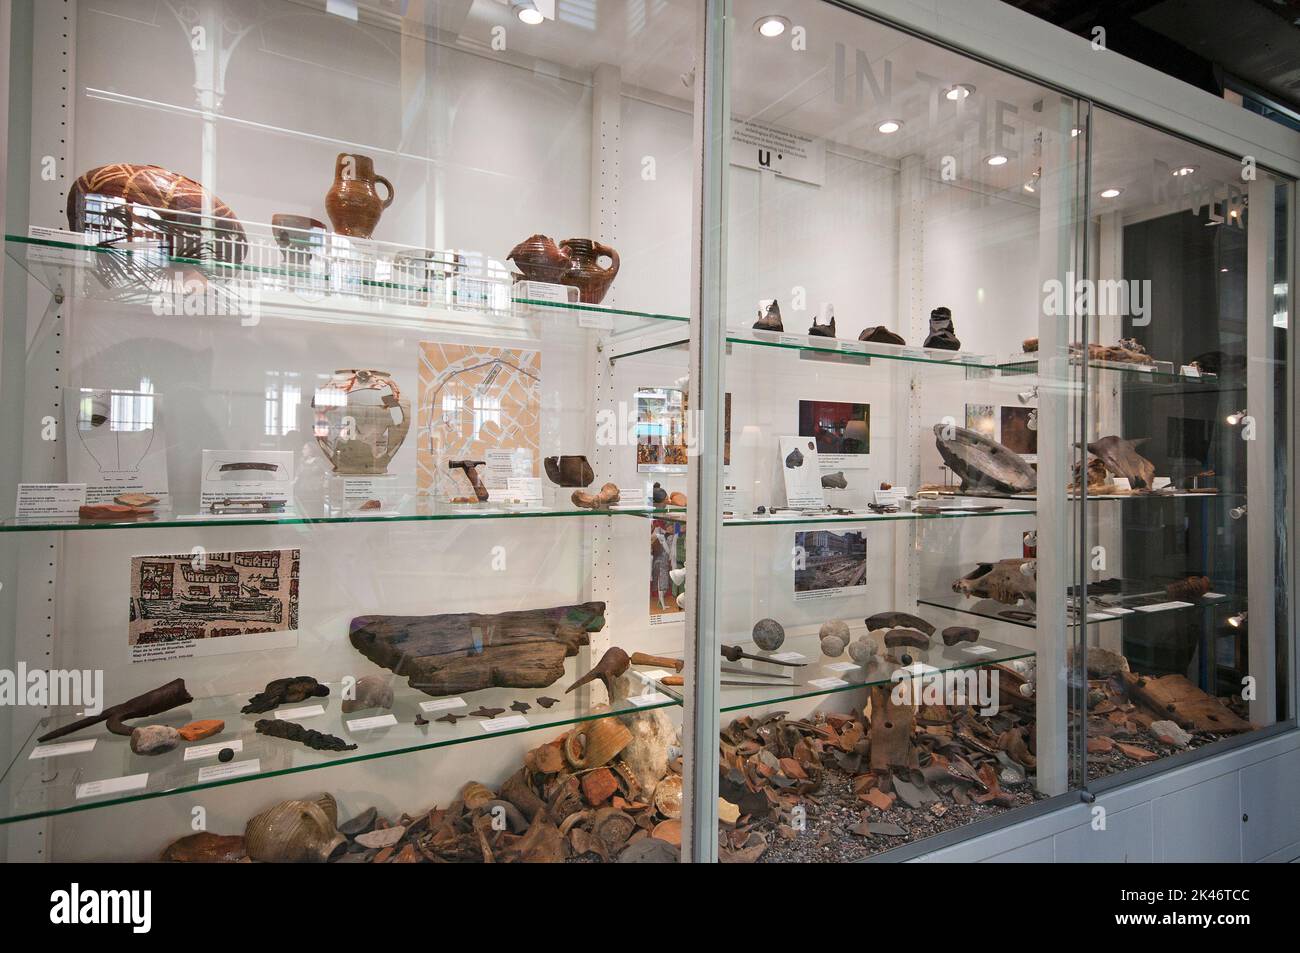 Ancient finds on display at Halle Saint-Gery cultural center, Brussels, Belgium Stock Photo